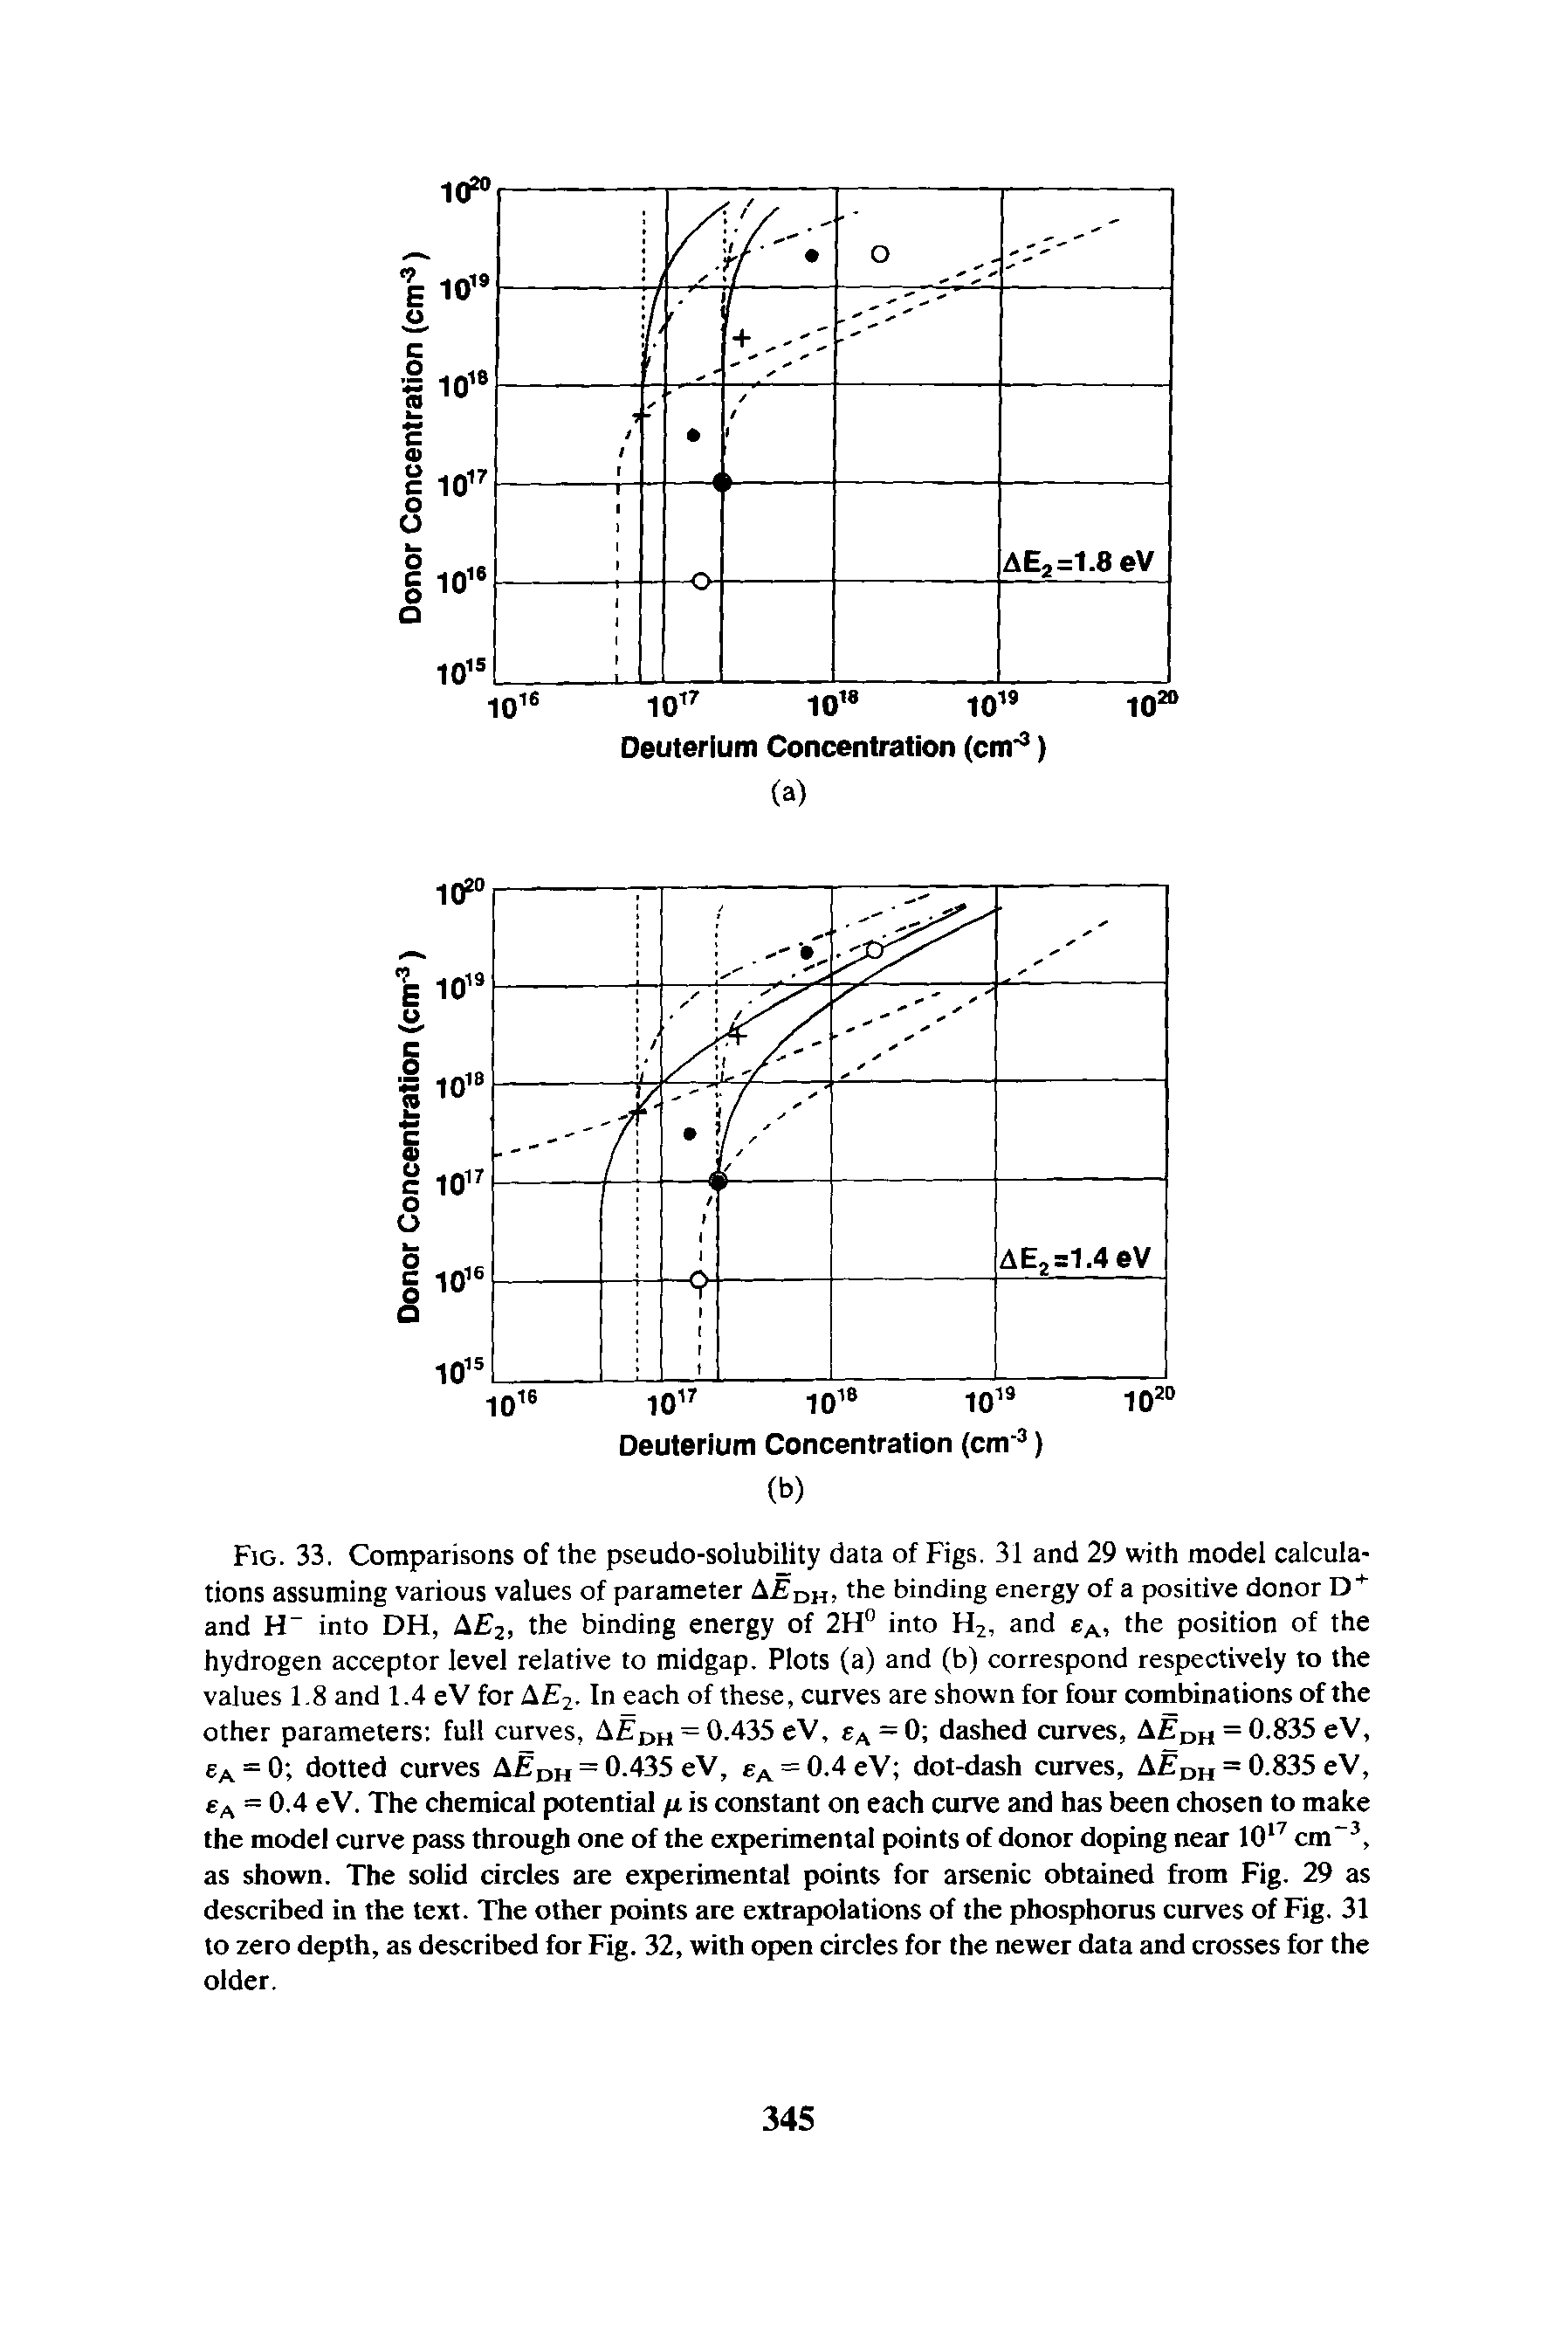 Fig. 33. Comparisons of the pseudo-solubility data of Figs. 31 and 29 with model calculations assuming various values of parameter A DH, the binding energy of a positive donor D + and H into DH, AE2, the binding energy of 2H° into H2, and eA, the position of the hydrogen acceptor level relative to midgap. Plots (a) and (b) correspond respectively to the values 1.8 and 1.4 eV for A E2- In each of these, curves are shown for four combinations of the other parameters full curves, AEDH = 0.435 eV, eA = 0 dashed curves, AEDH = 0.835 eV, ea = 0 dotted curves AEDH = 0.435 eV, eA = 0.4eV dot-dash curves, A DH = 0.835 eV, eA = 0.4 eV. The chemical potential fi is constant on each curve and has been chosen to make the model curve pass through one of the experimental points of donor doping near 1017 cm-3, as shown. The solid circles are experimental points for arsenic obtained from Fig. 29 as described in the text. The other points are extrapolations of the phosphorus curves of Fig. 31 to zero depth, as described for Fig. 32, with open circles for the newer data and crosses for the older.